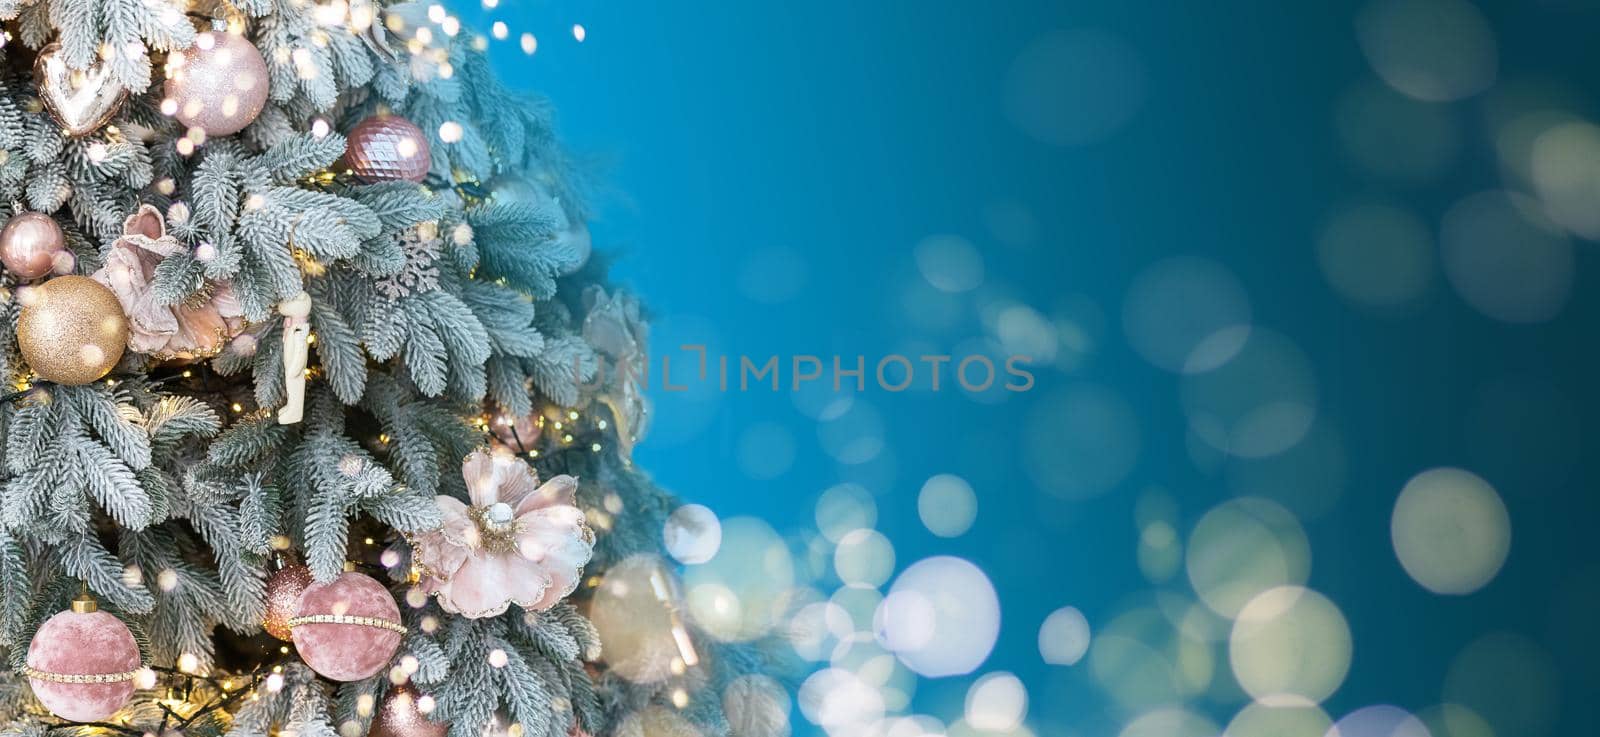 Magically decorated Christmas Tree with balls, ribbons and garlands on a blurred blue shiny, fairy and sparkling background